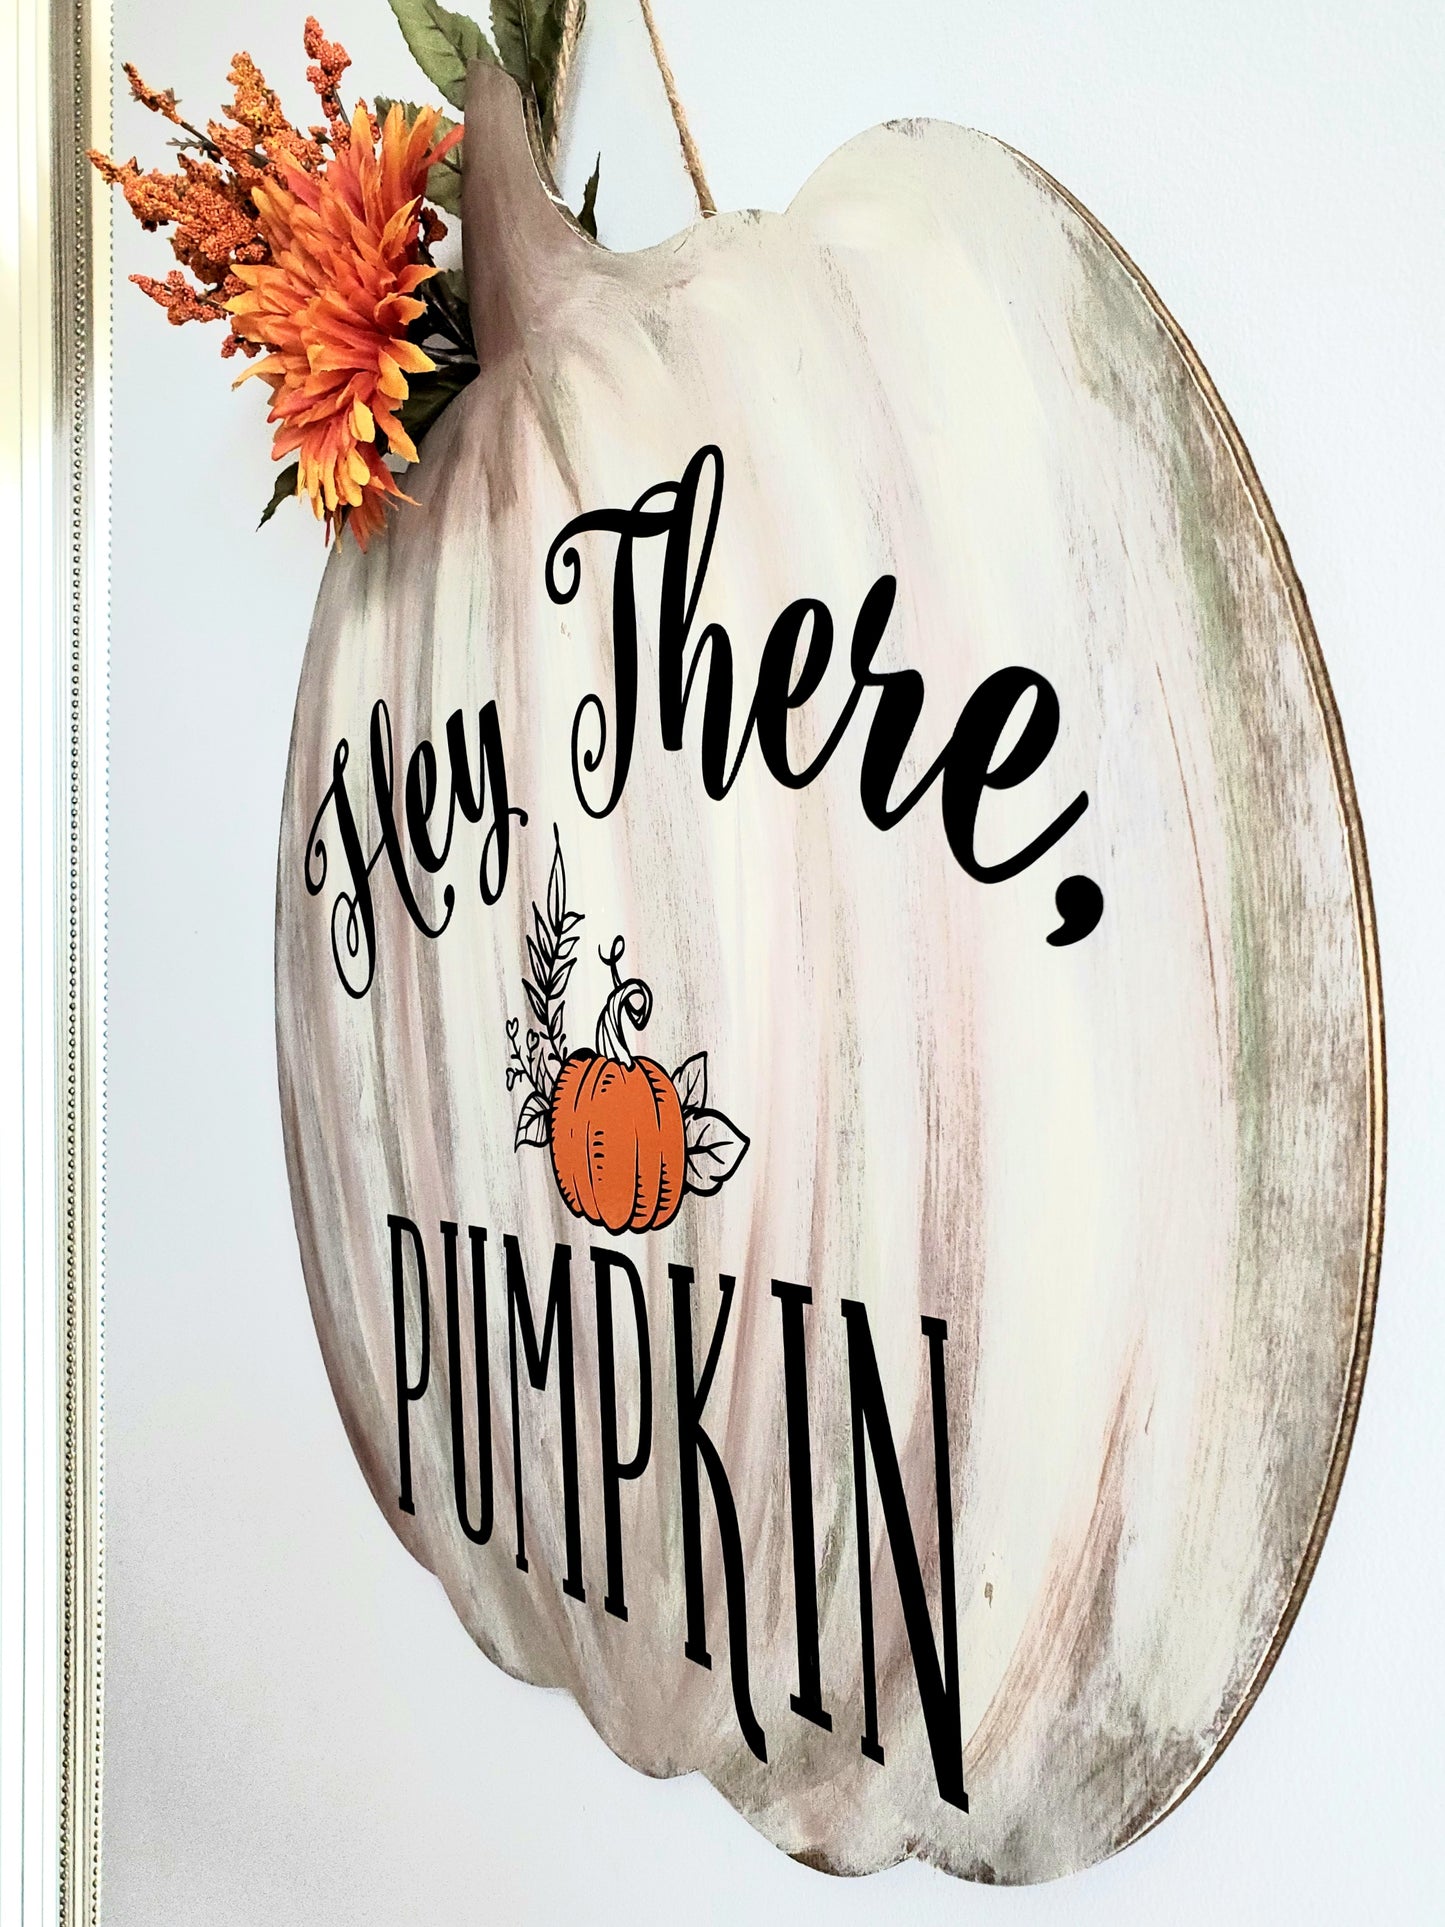 Hey There Pumpkin Wood Sign - A Uniquely Designed Pumpkin-Shaped Sign  for Your Fall Home Decor